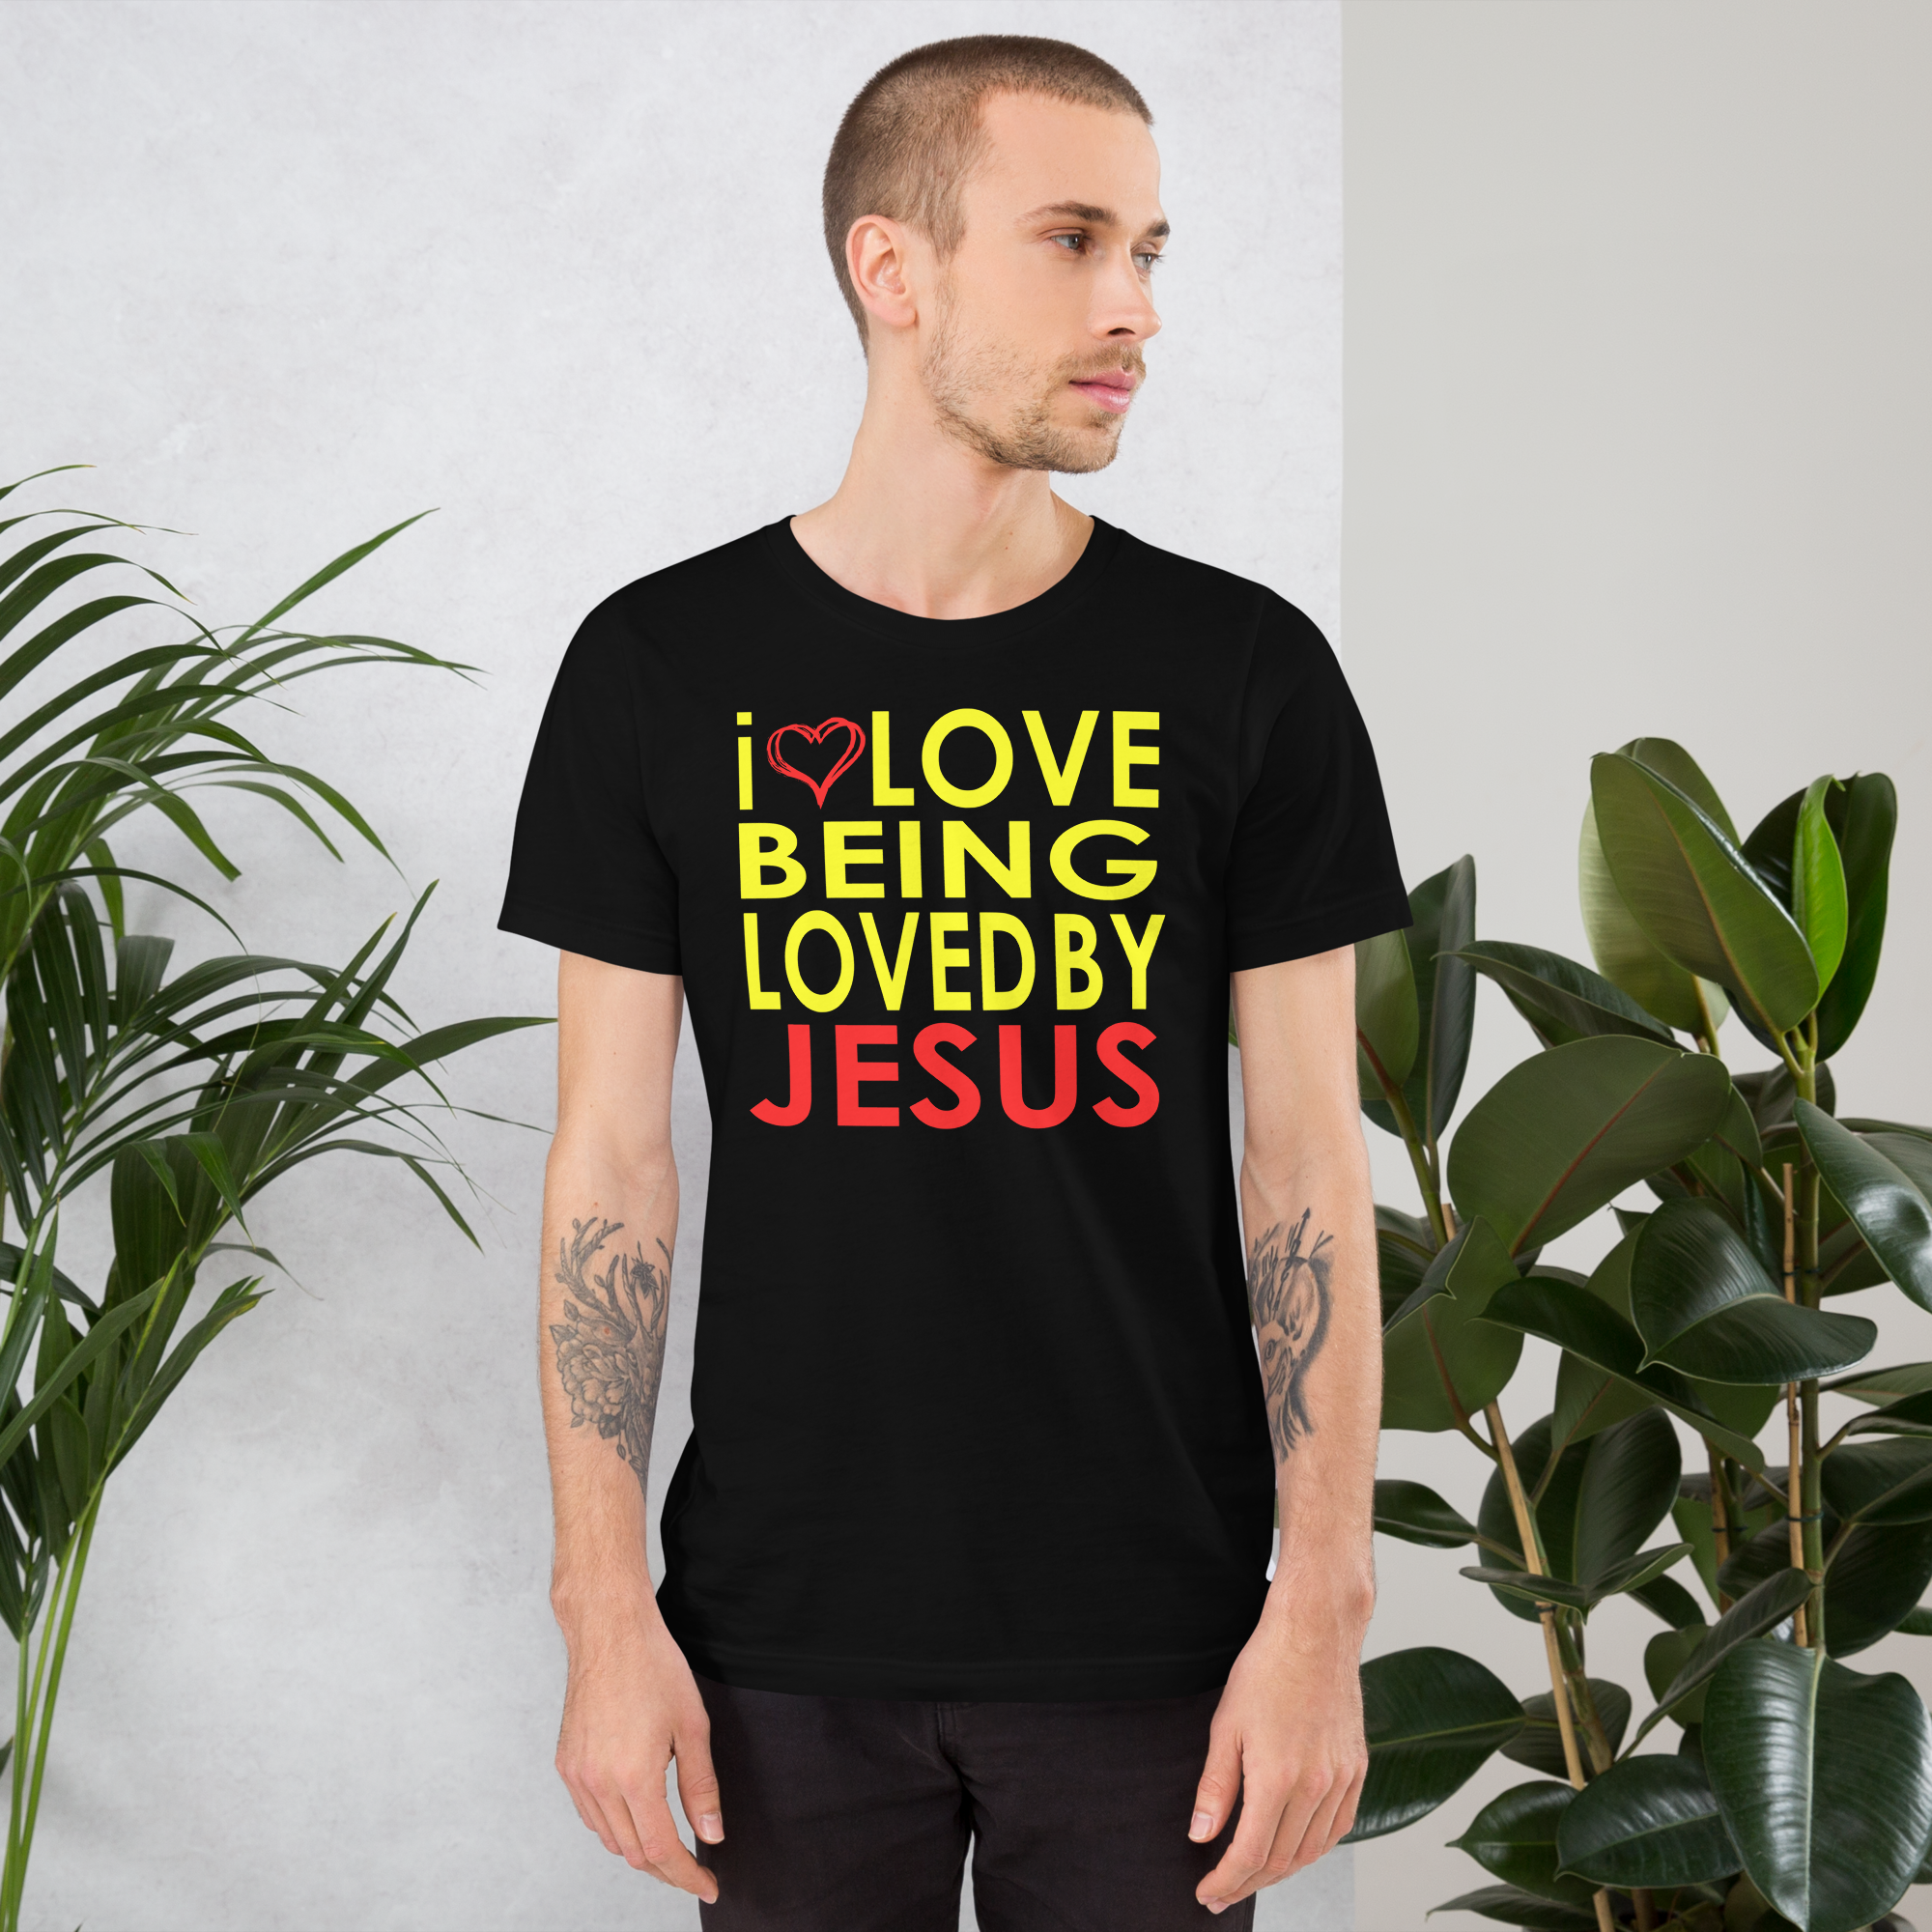 LOVED BY JESUS t-shirt